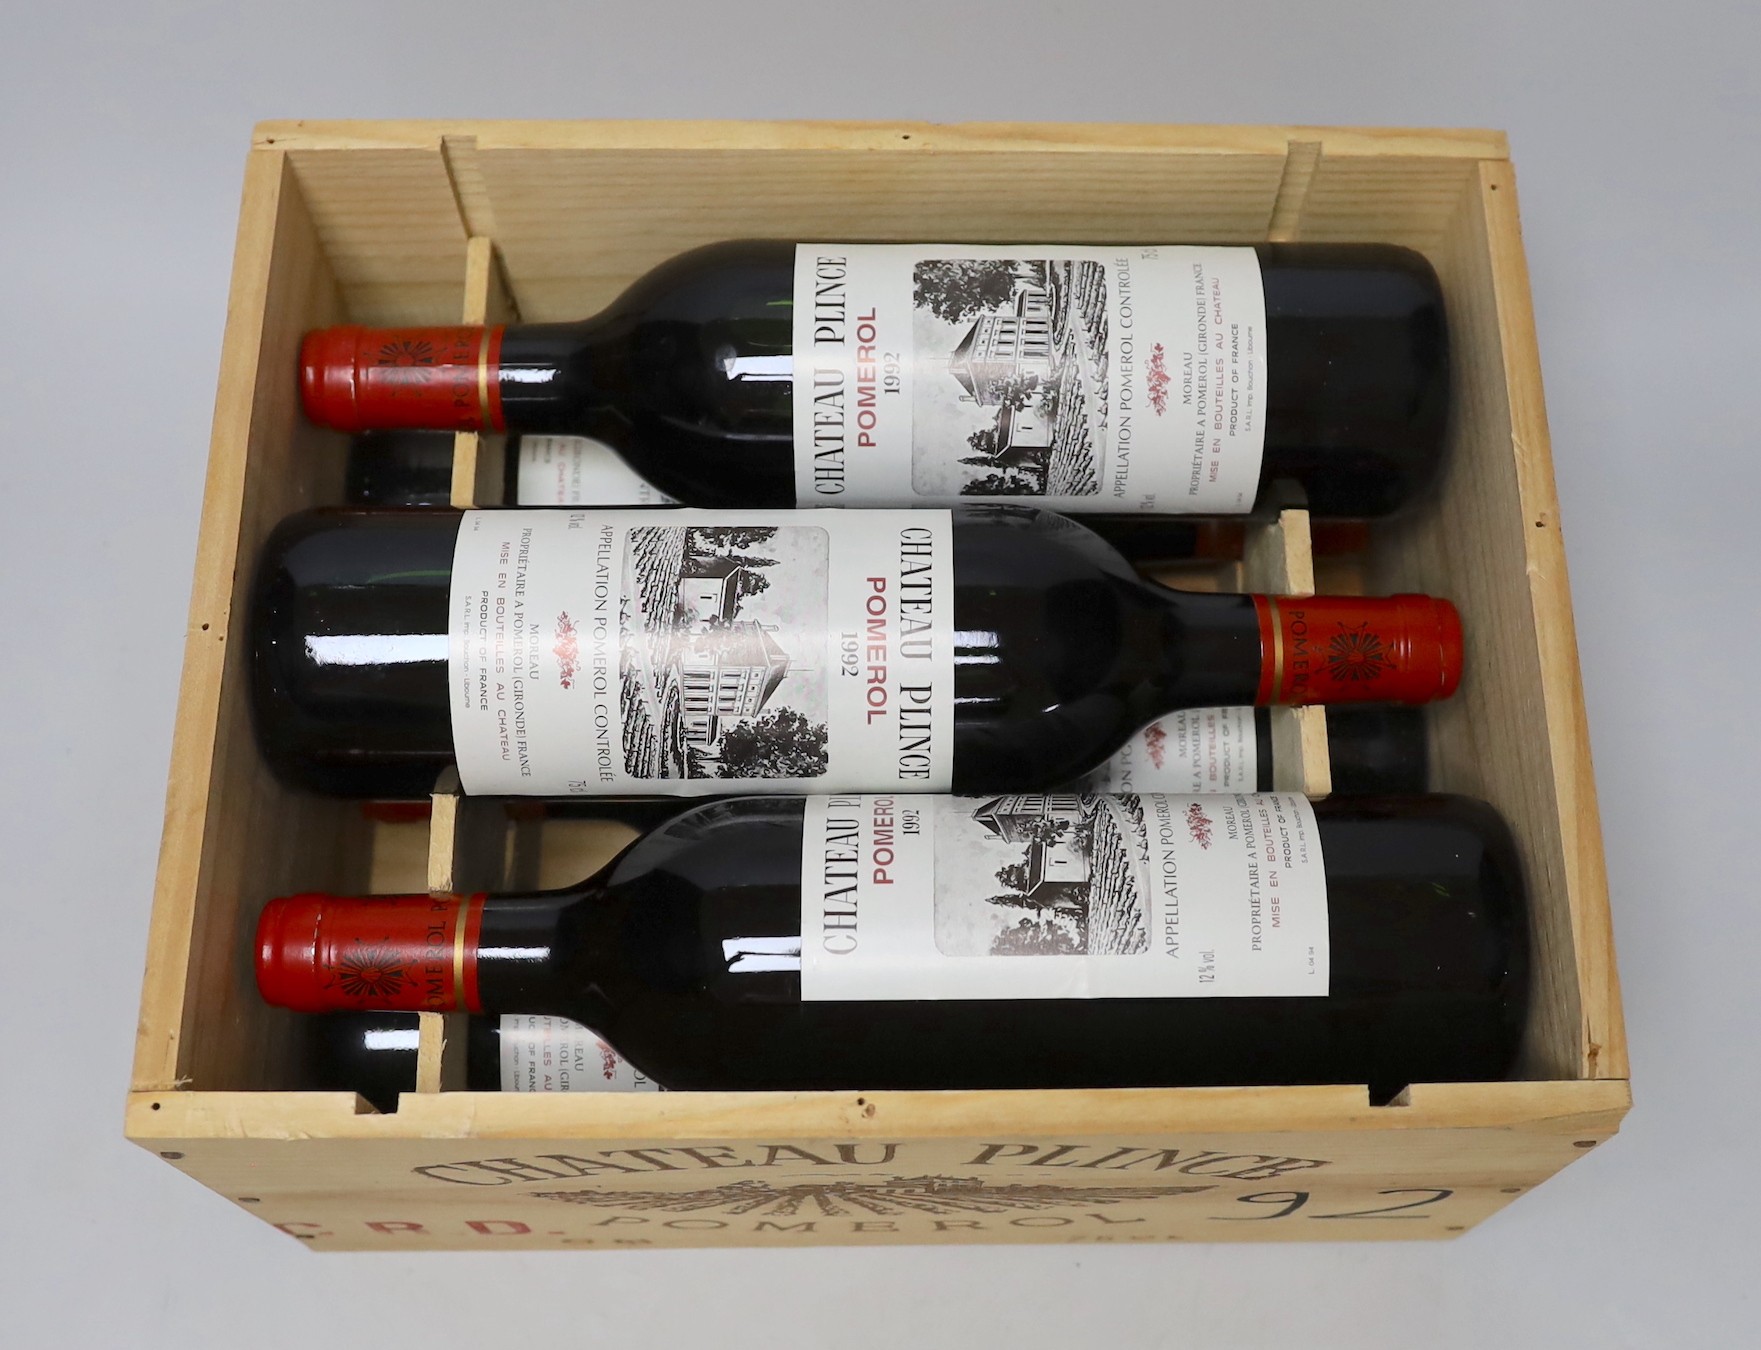 Six bottles of Chateau Plince, Pomerol, 1992, boxed